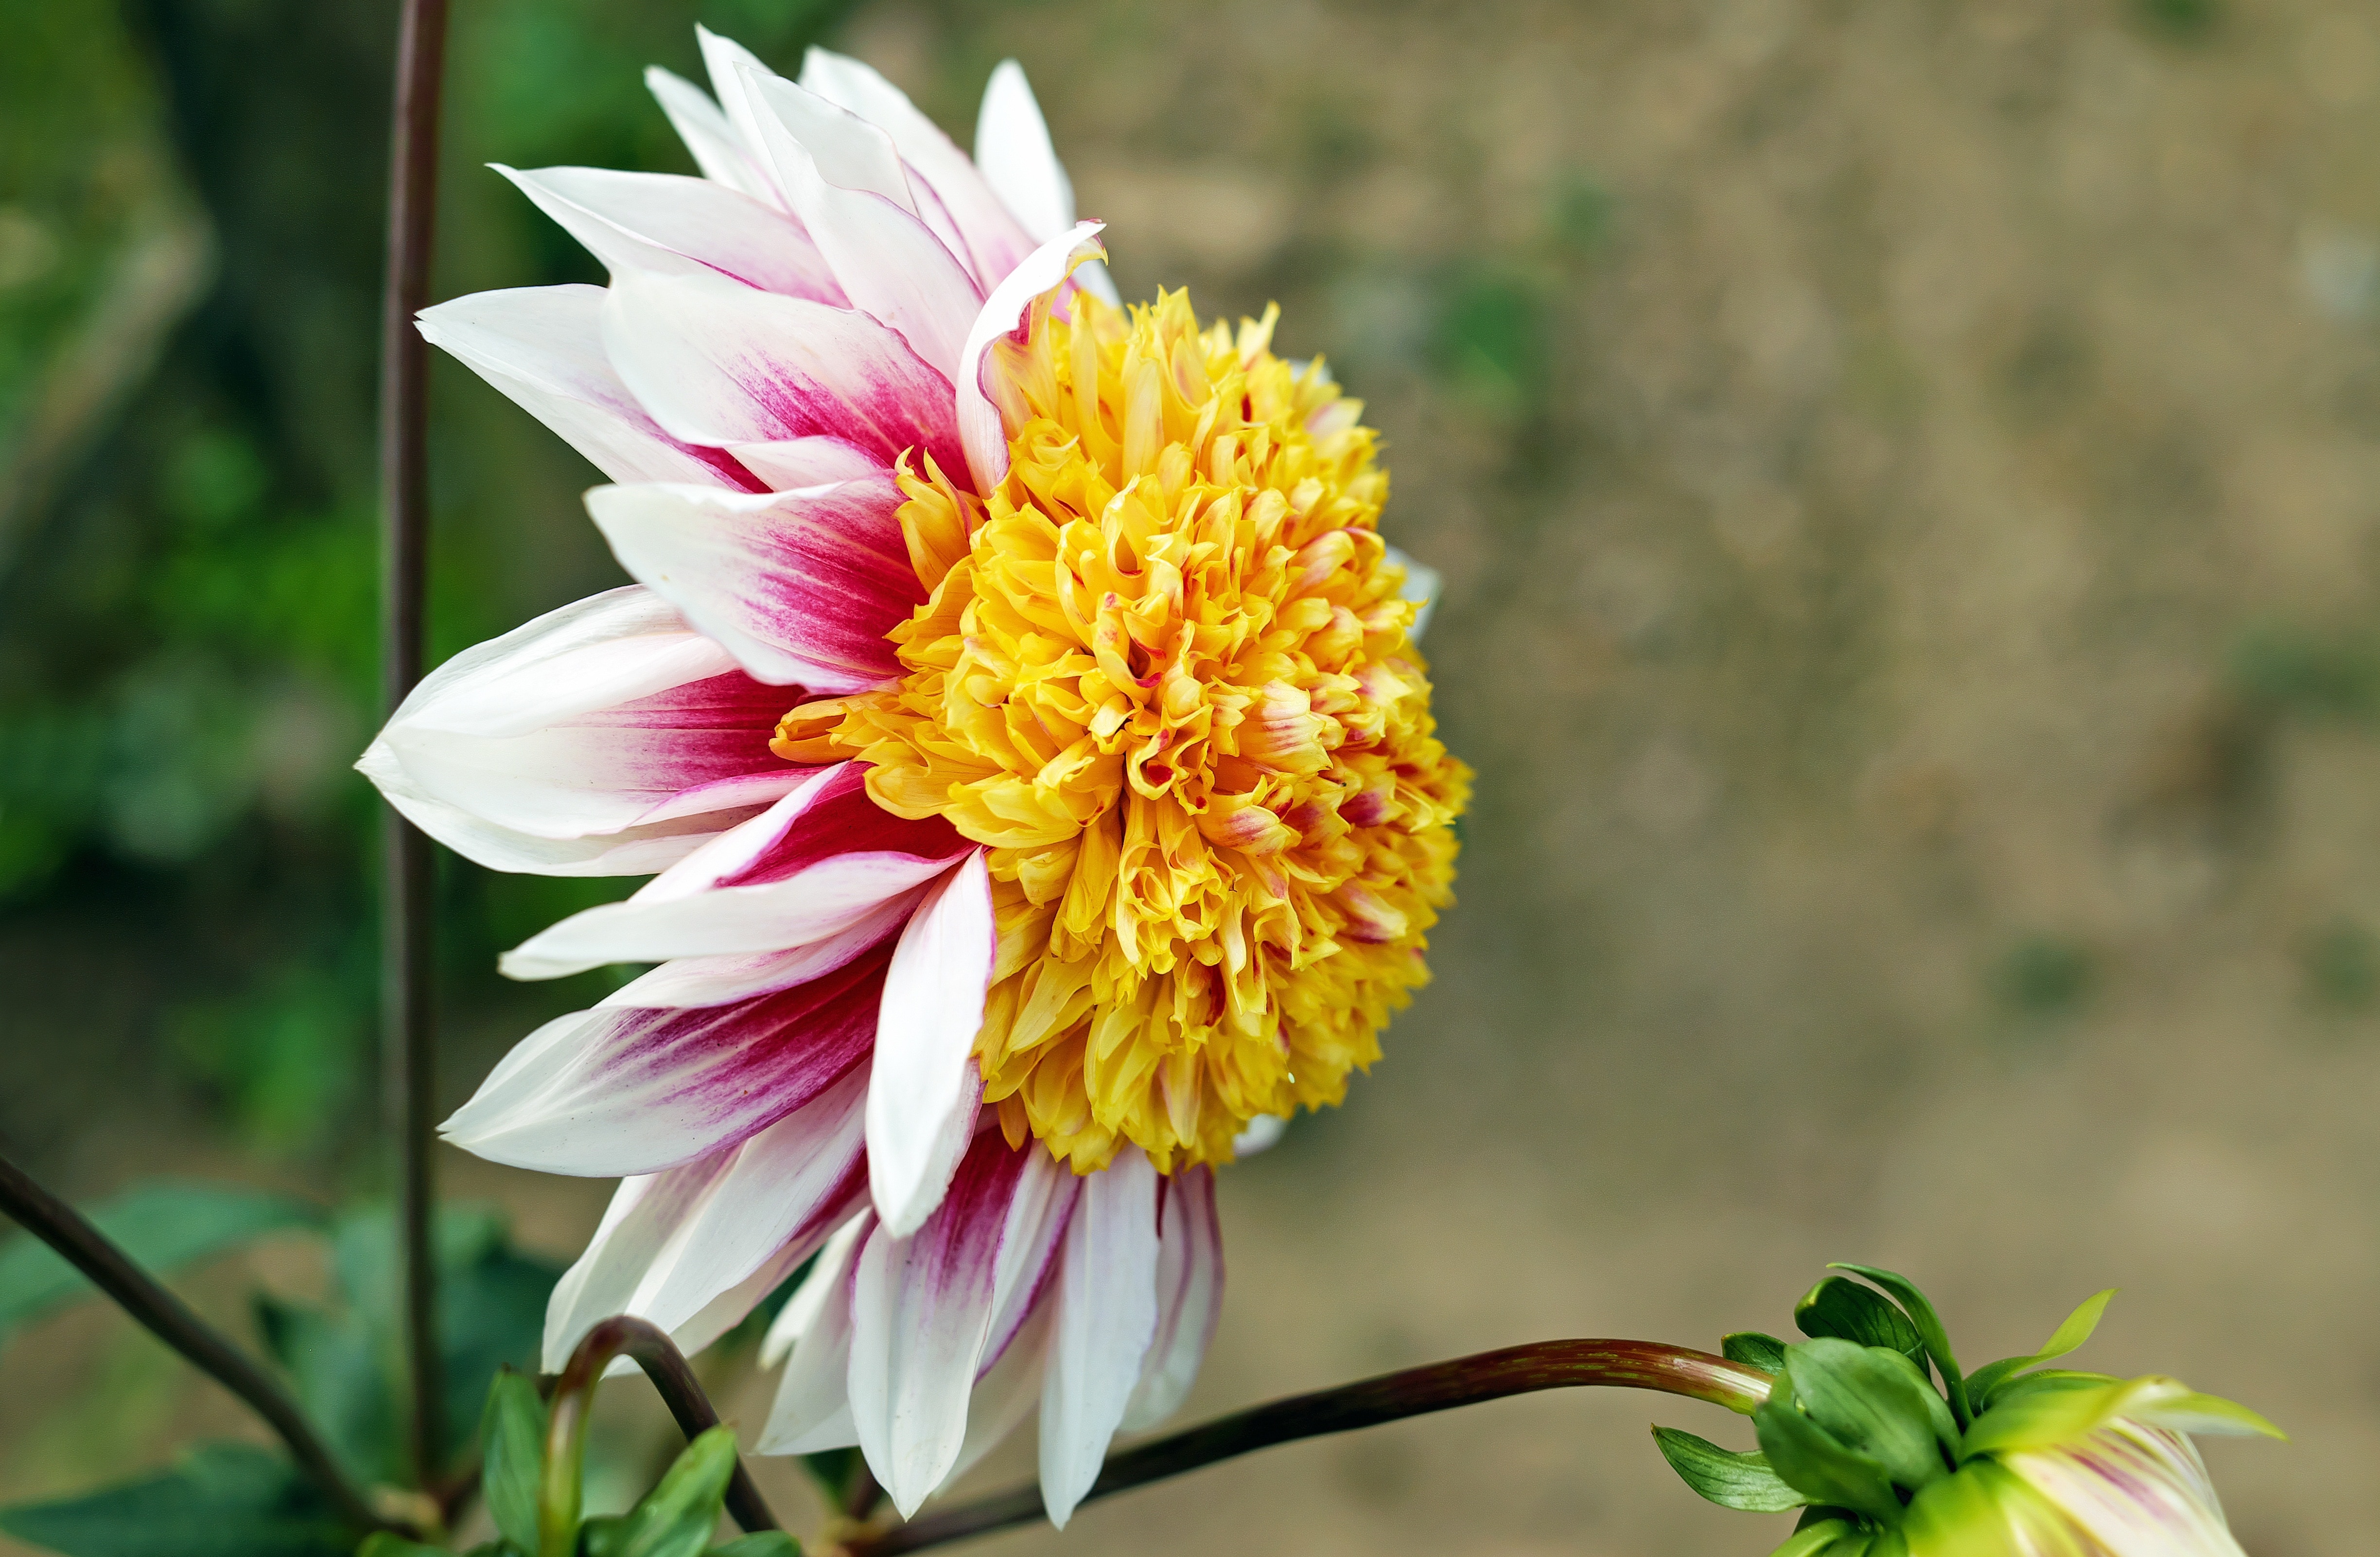 yellow white and pink clustered petal flower